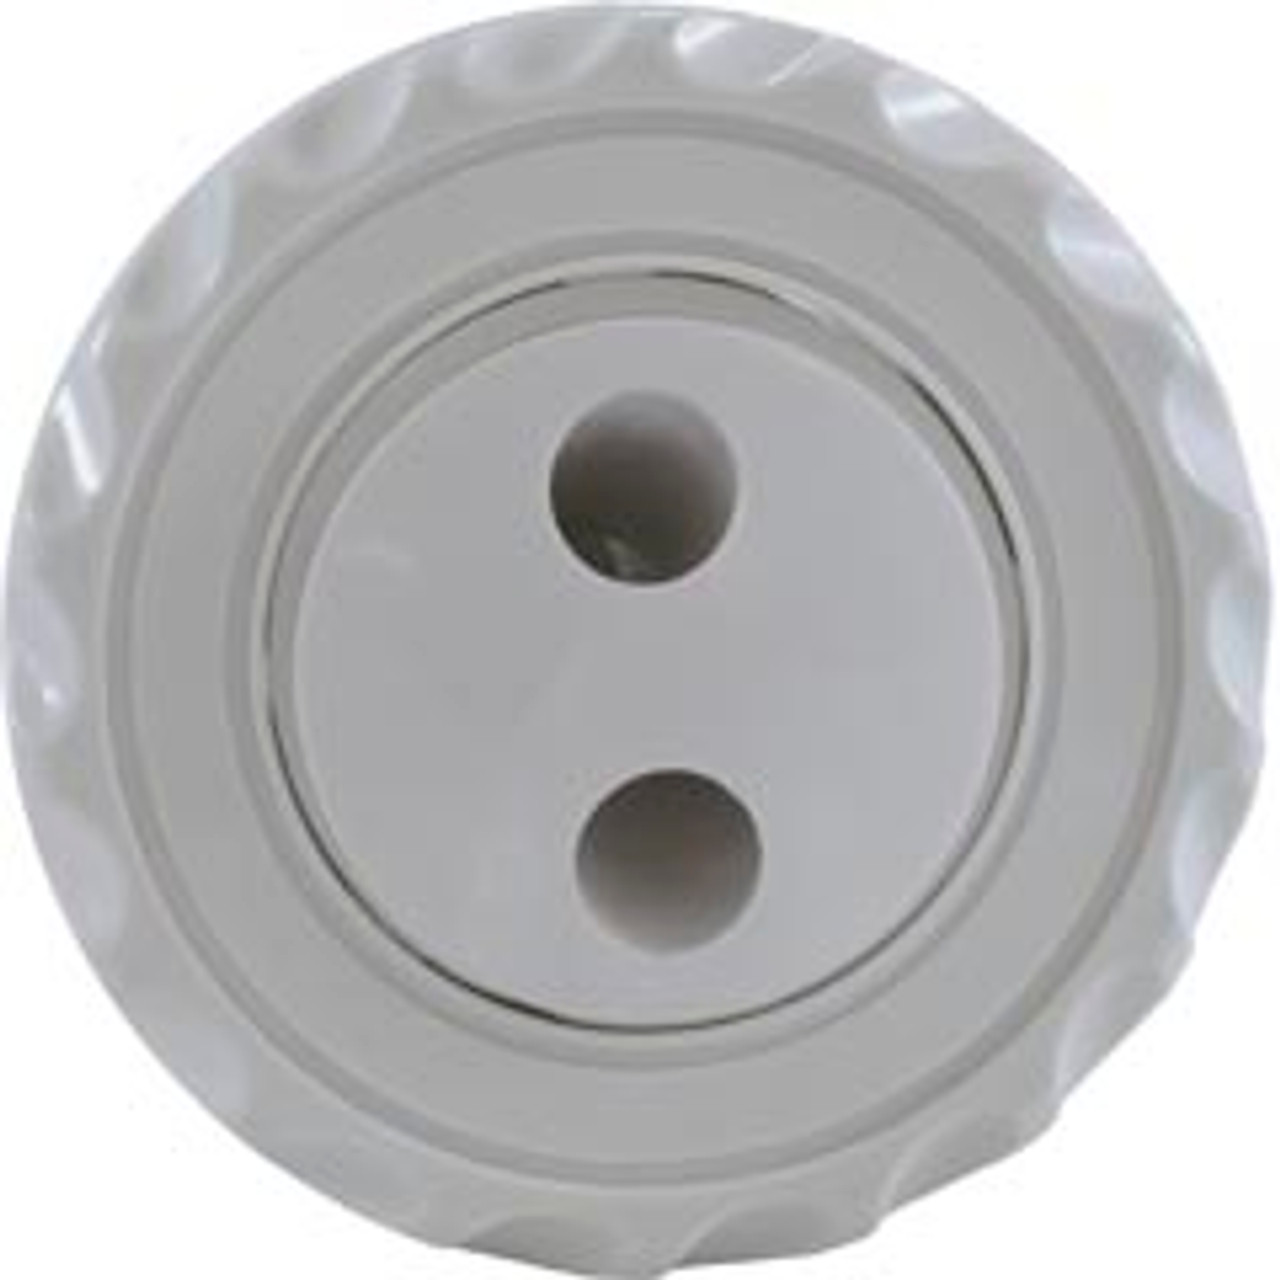 25591-230-000, Poly Jet, 3-3/8", Face, Dia, Diameter, Pulsator,  White, CMP,  Custom Molded Products, Spa, Hot Tub, Jet Internal, Waterway, 849640016527, 901379